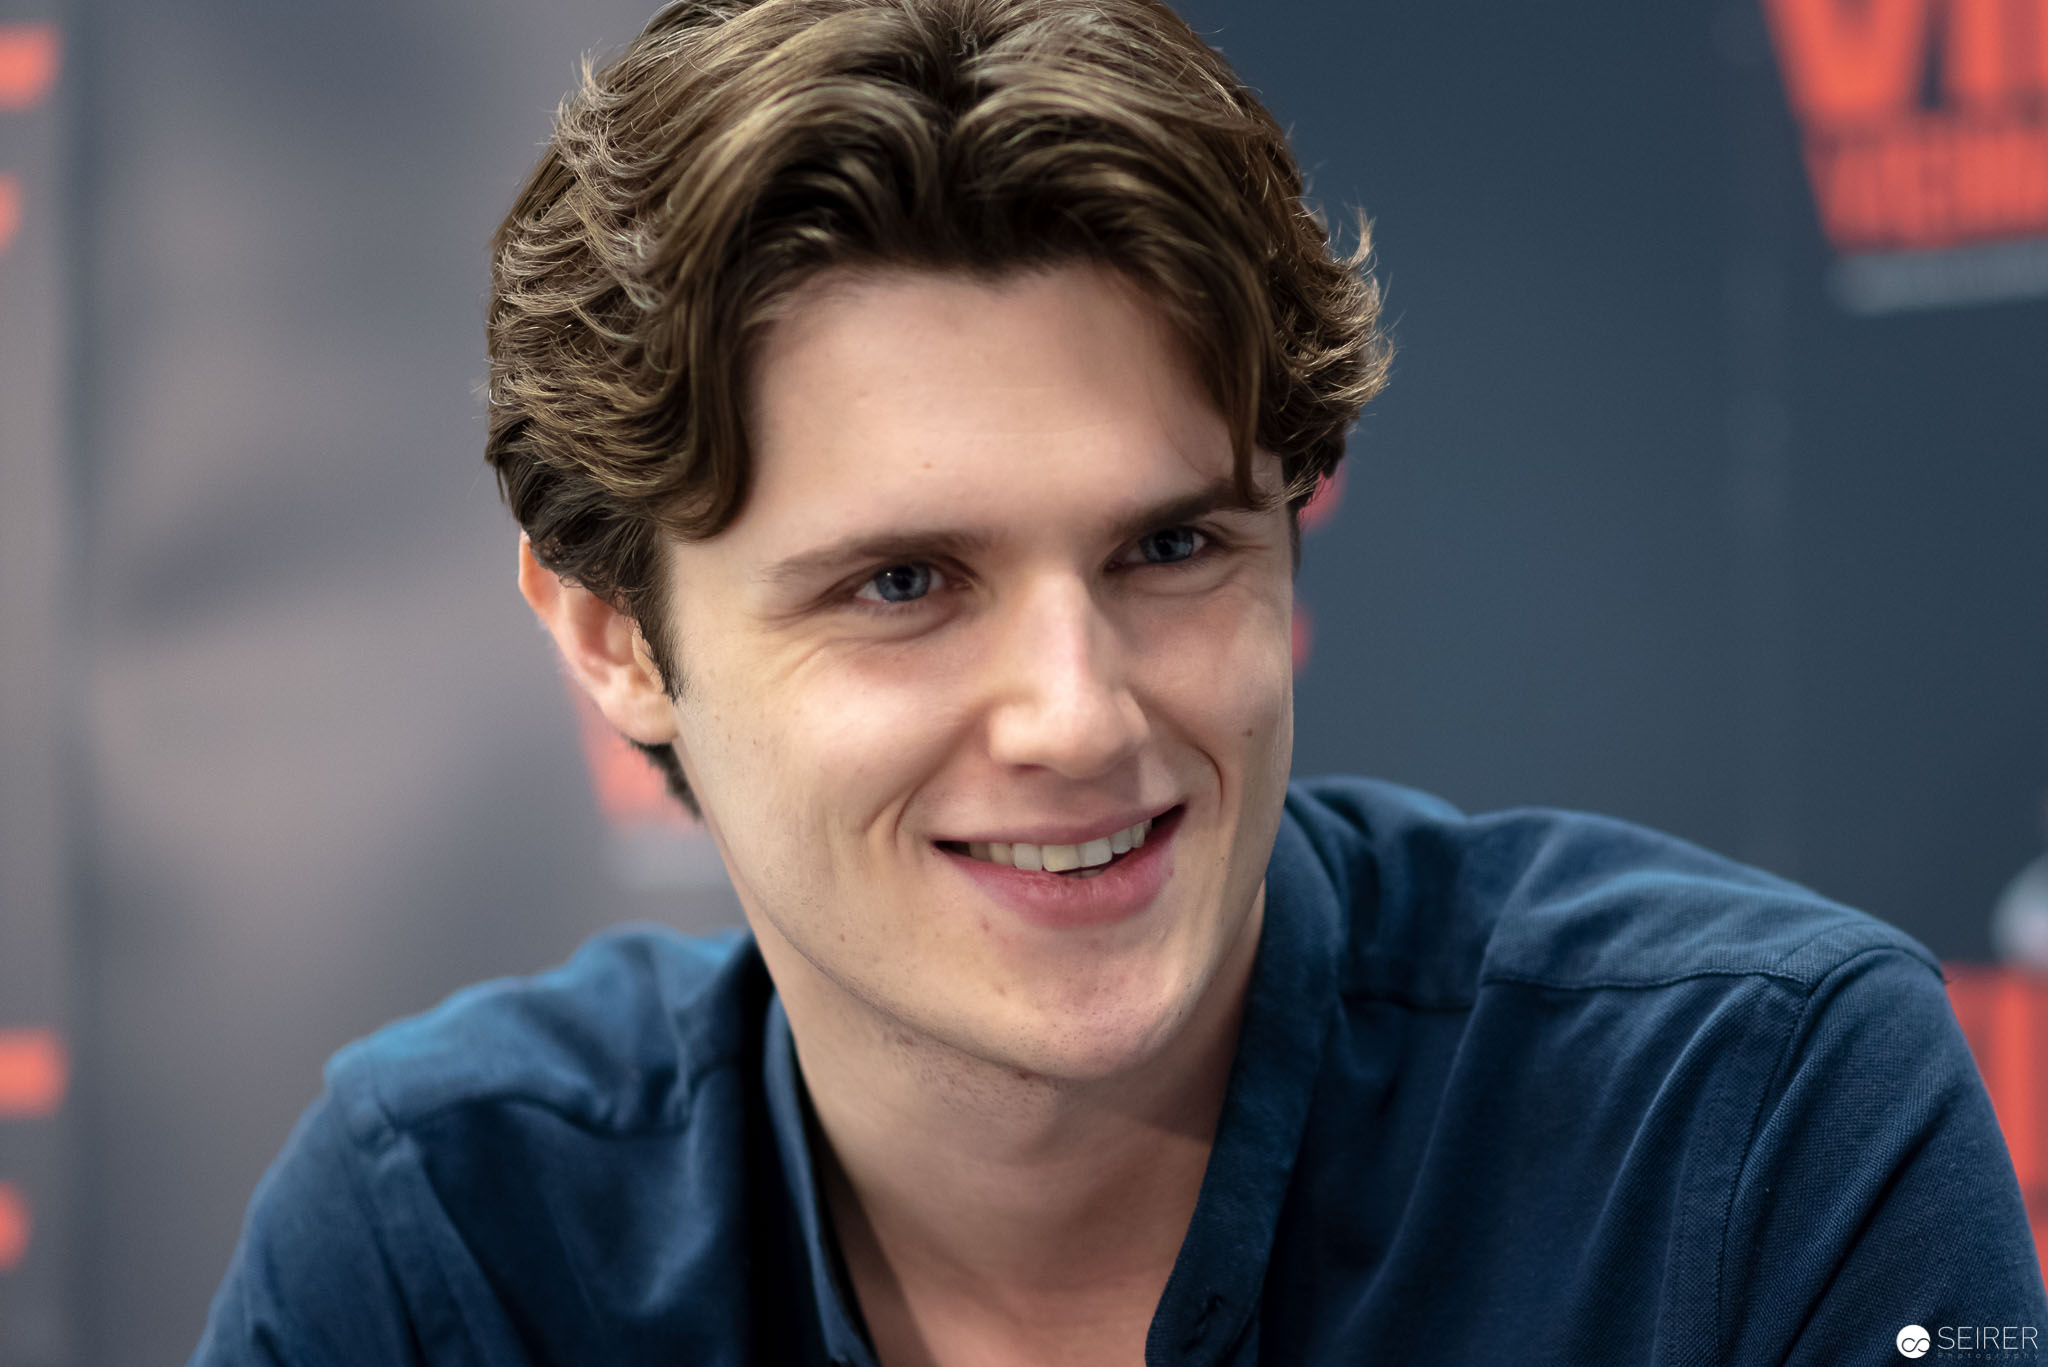 Hear him roar - Interview with Eugene Simon at the VIECC 2018